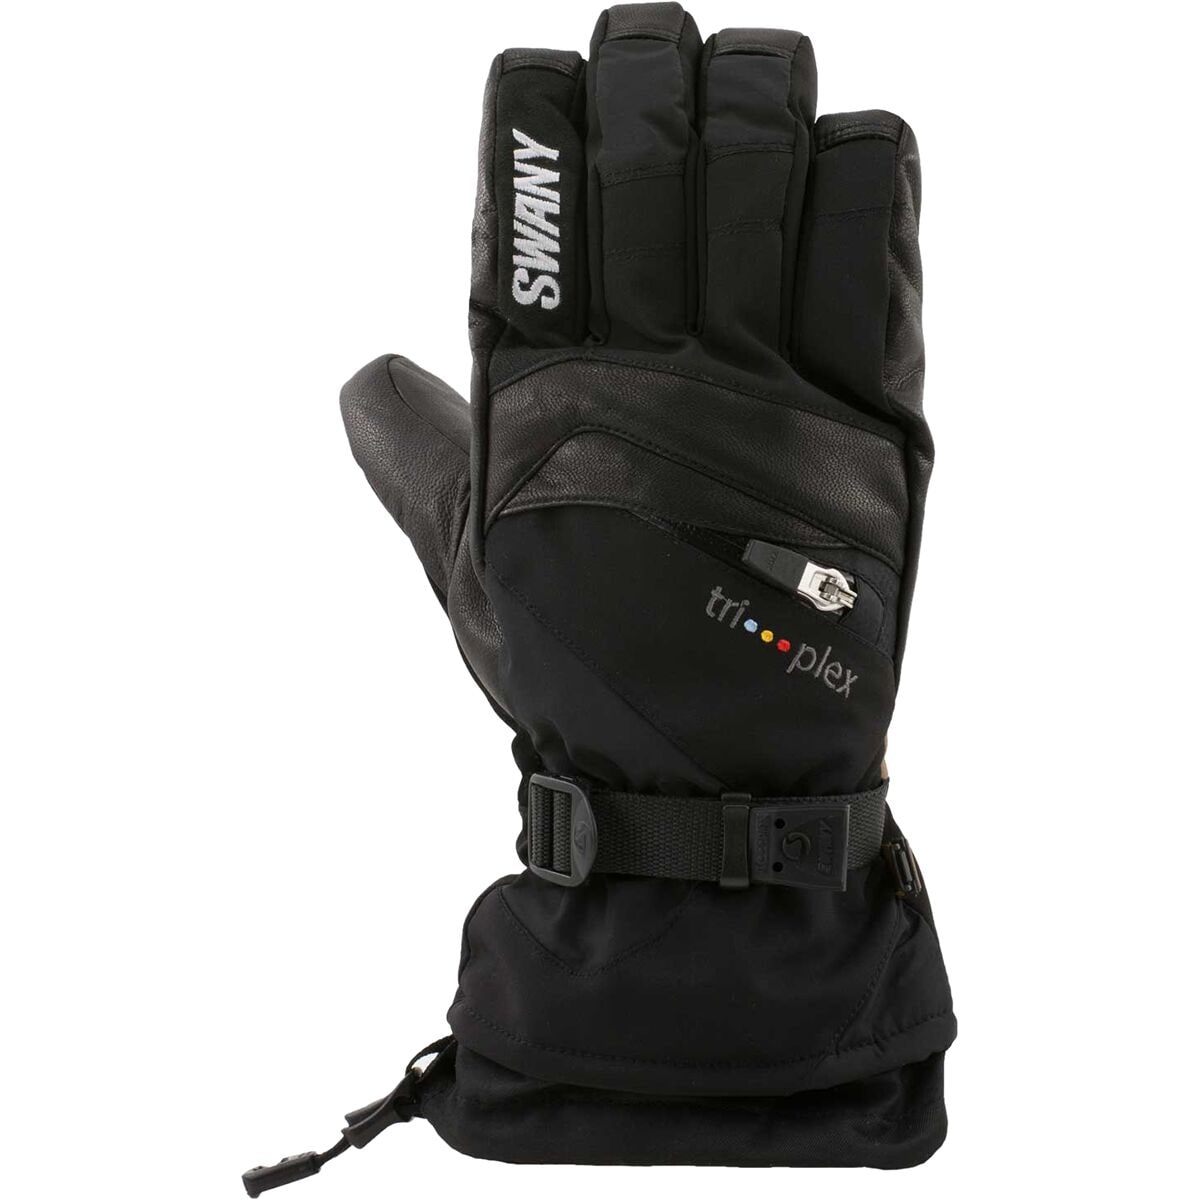 Swany X-Change Glove - Women's - Accessories | Backcountry